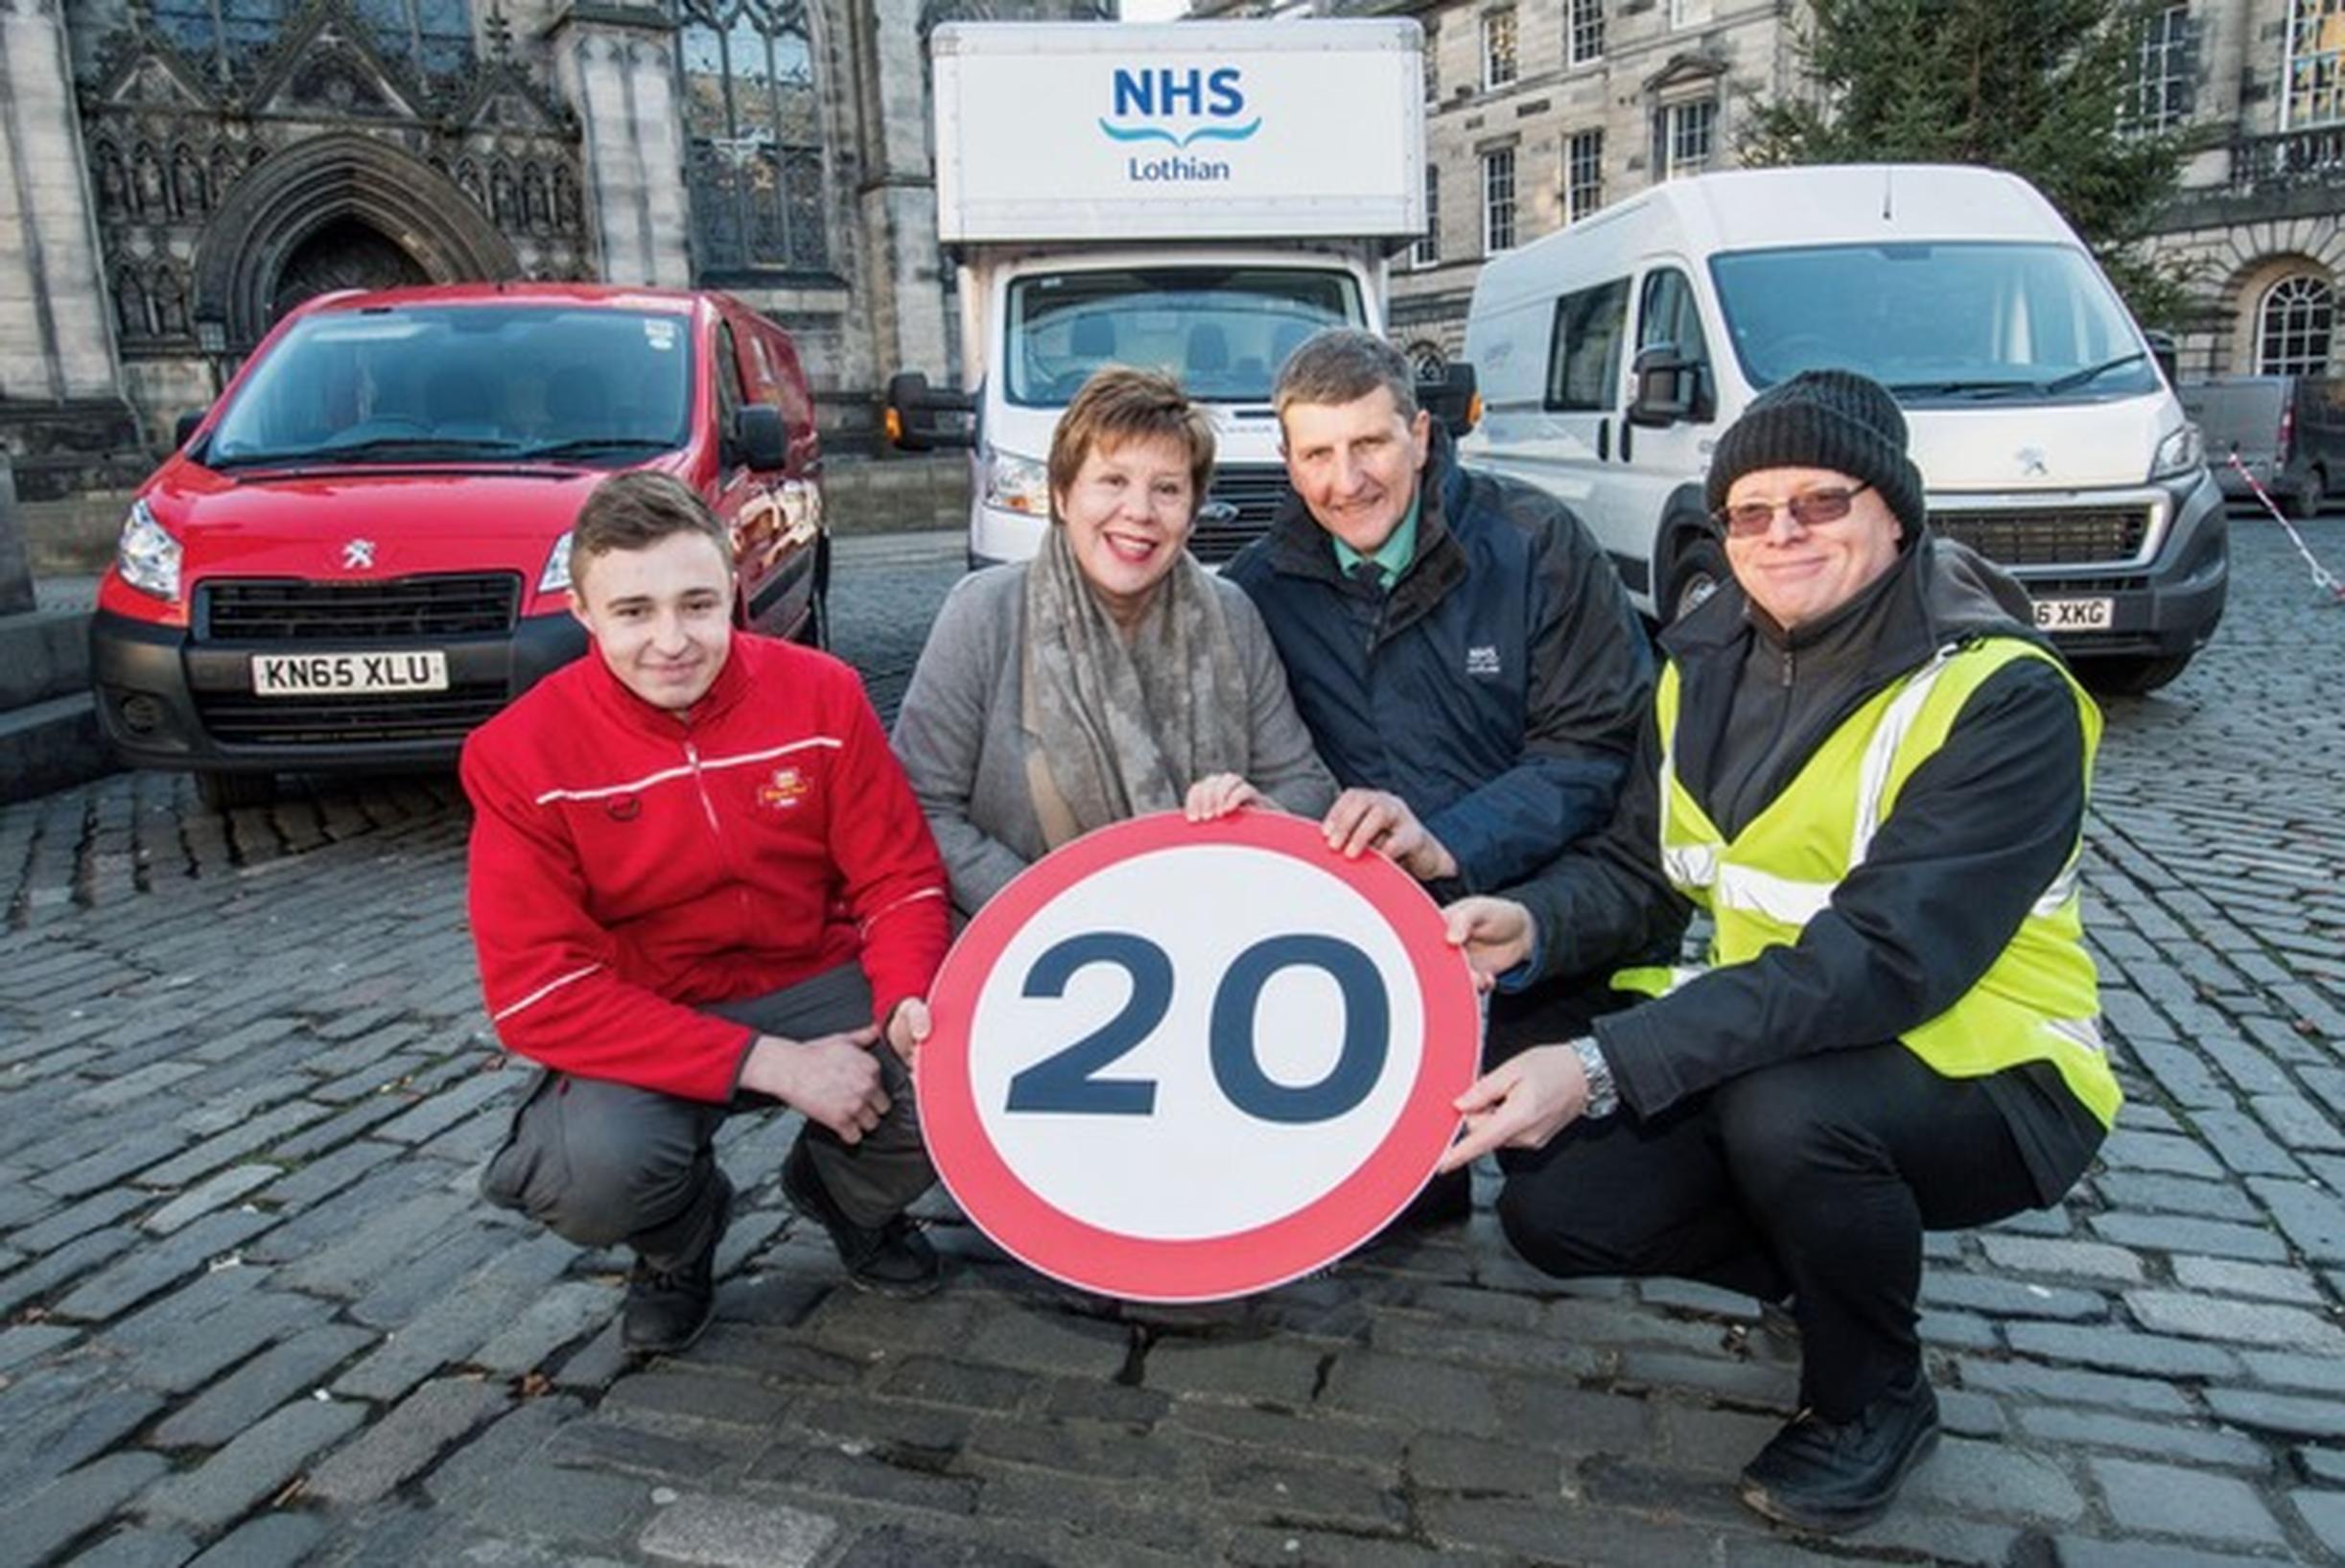 Cllr Lesley Hinds with Edinburgh council, Royal Mail and NHS employees showing their backing for the 20mph limit